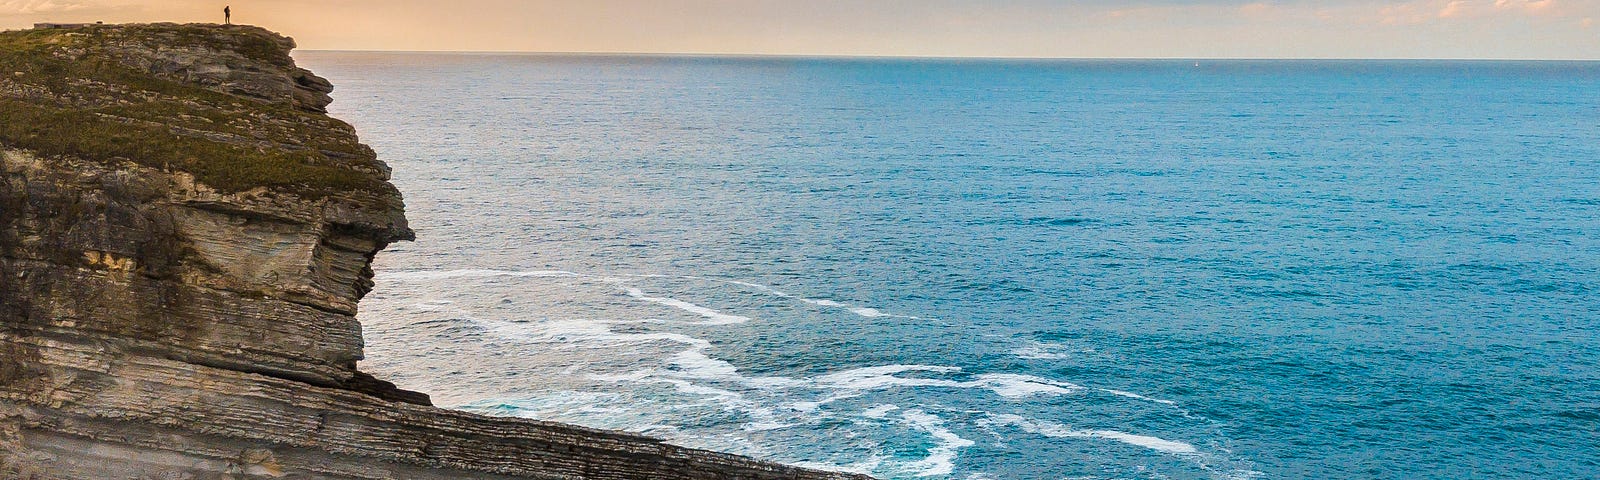 A person standing on a high cliff looking out over the ocean